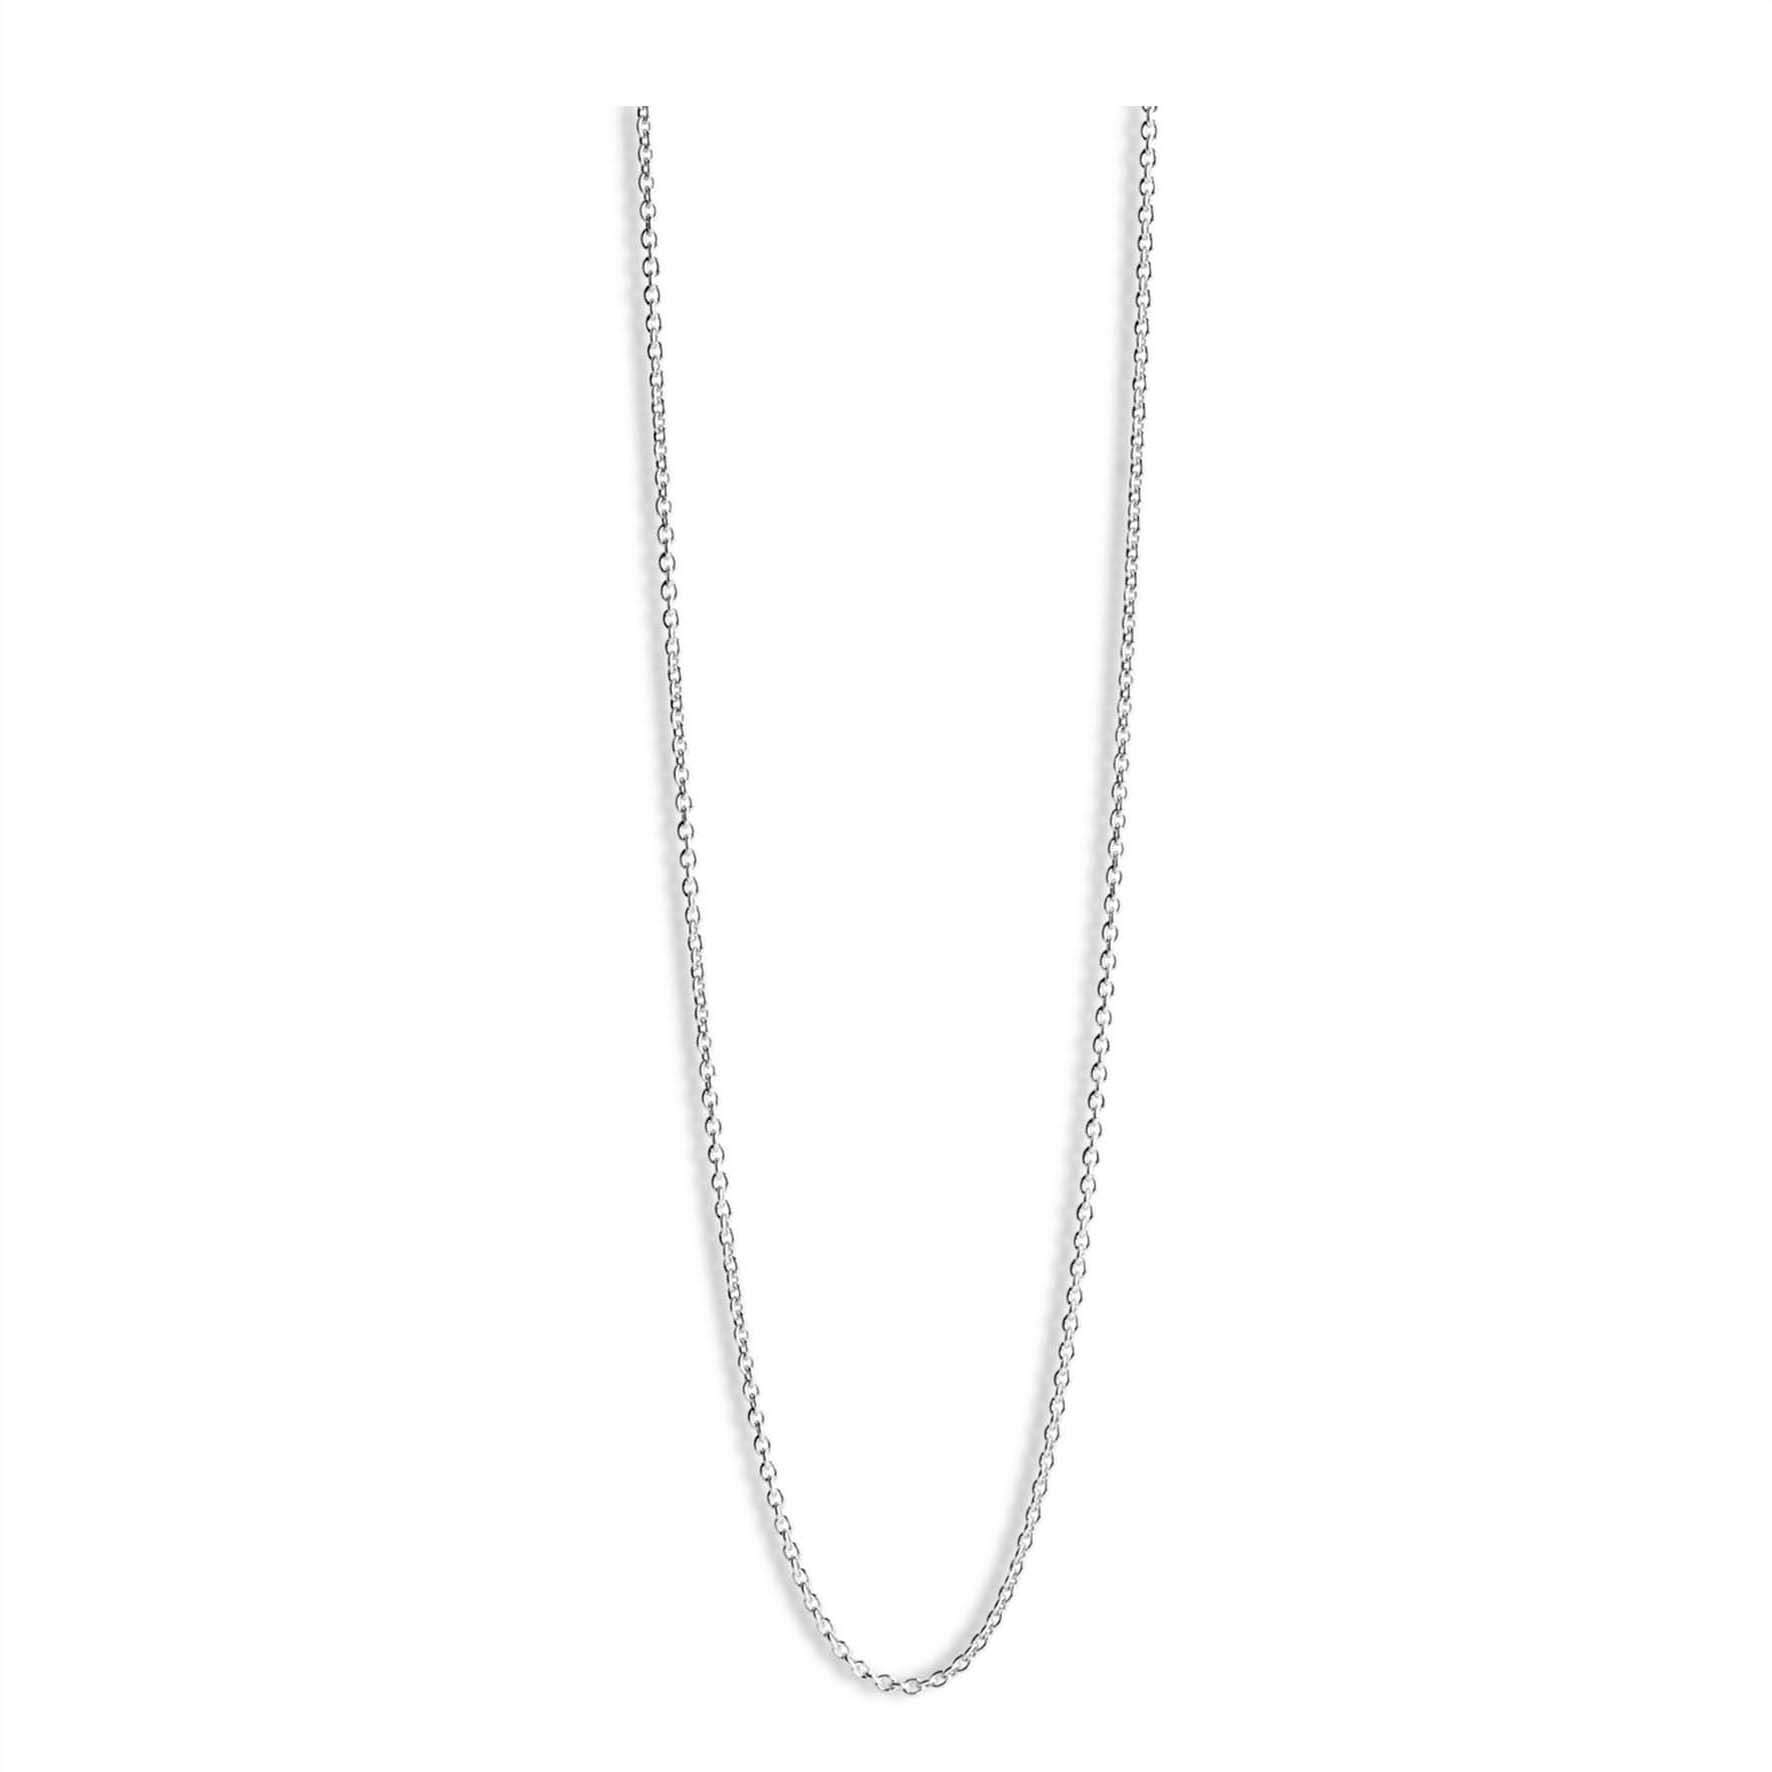 Anchor Chain Necklace from Jane Kønig in Silver Sterling 925|